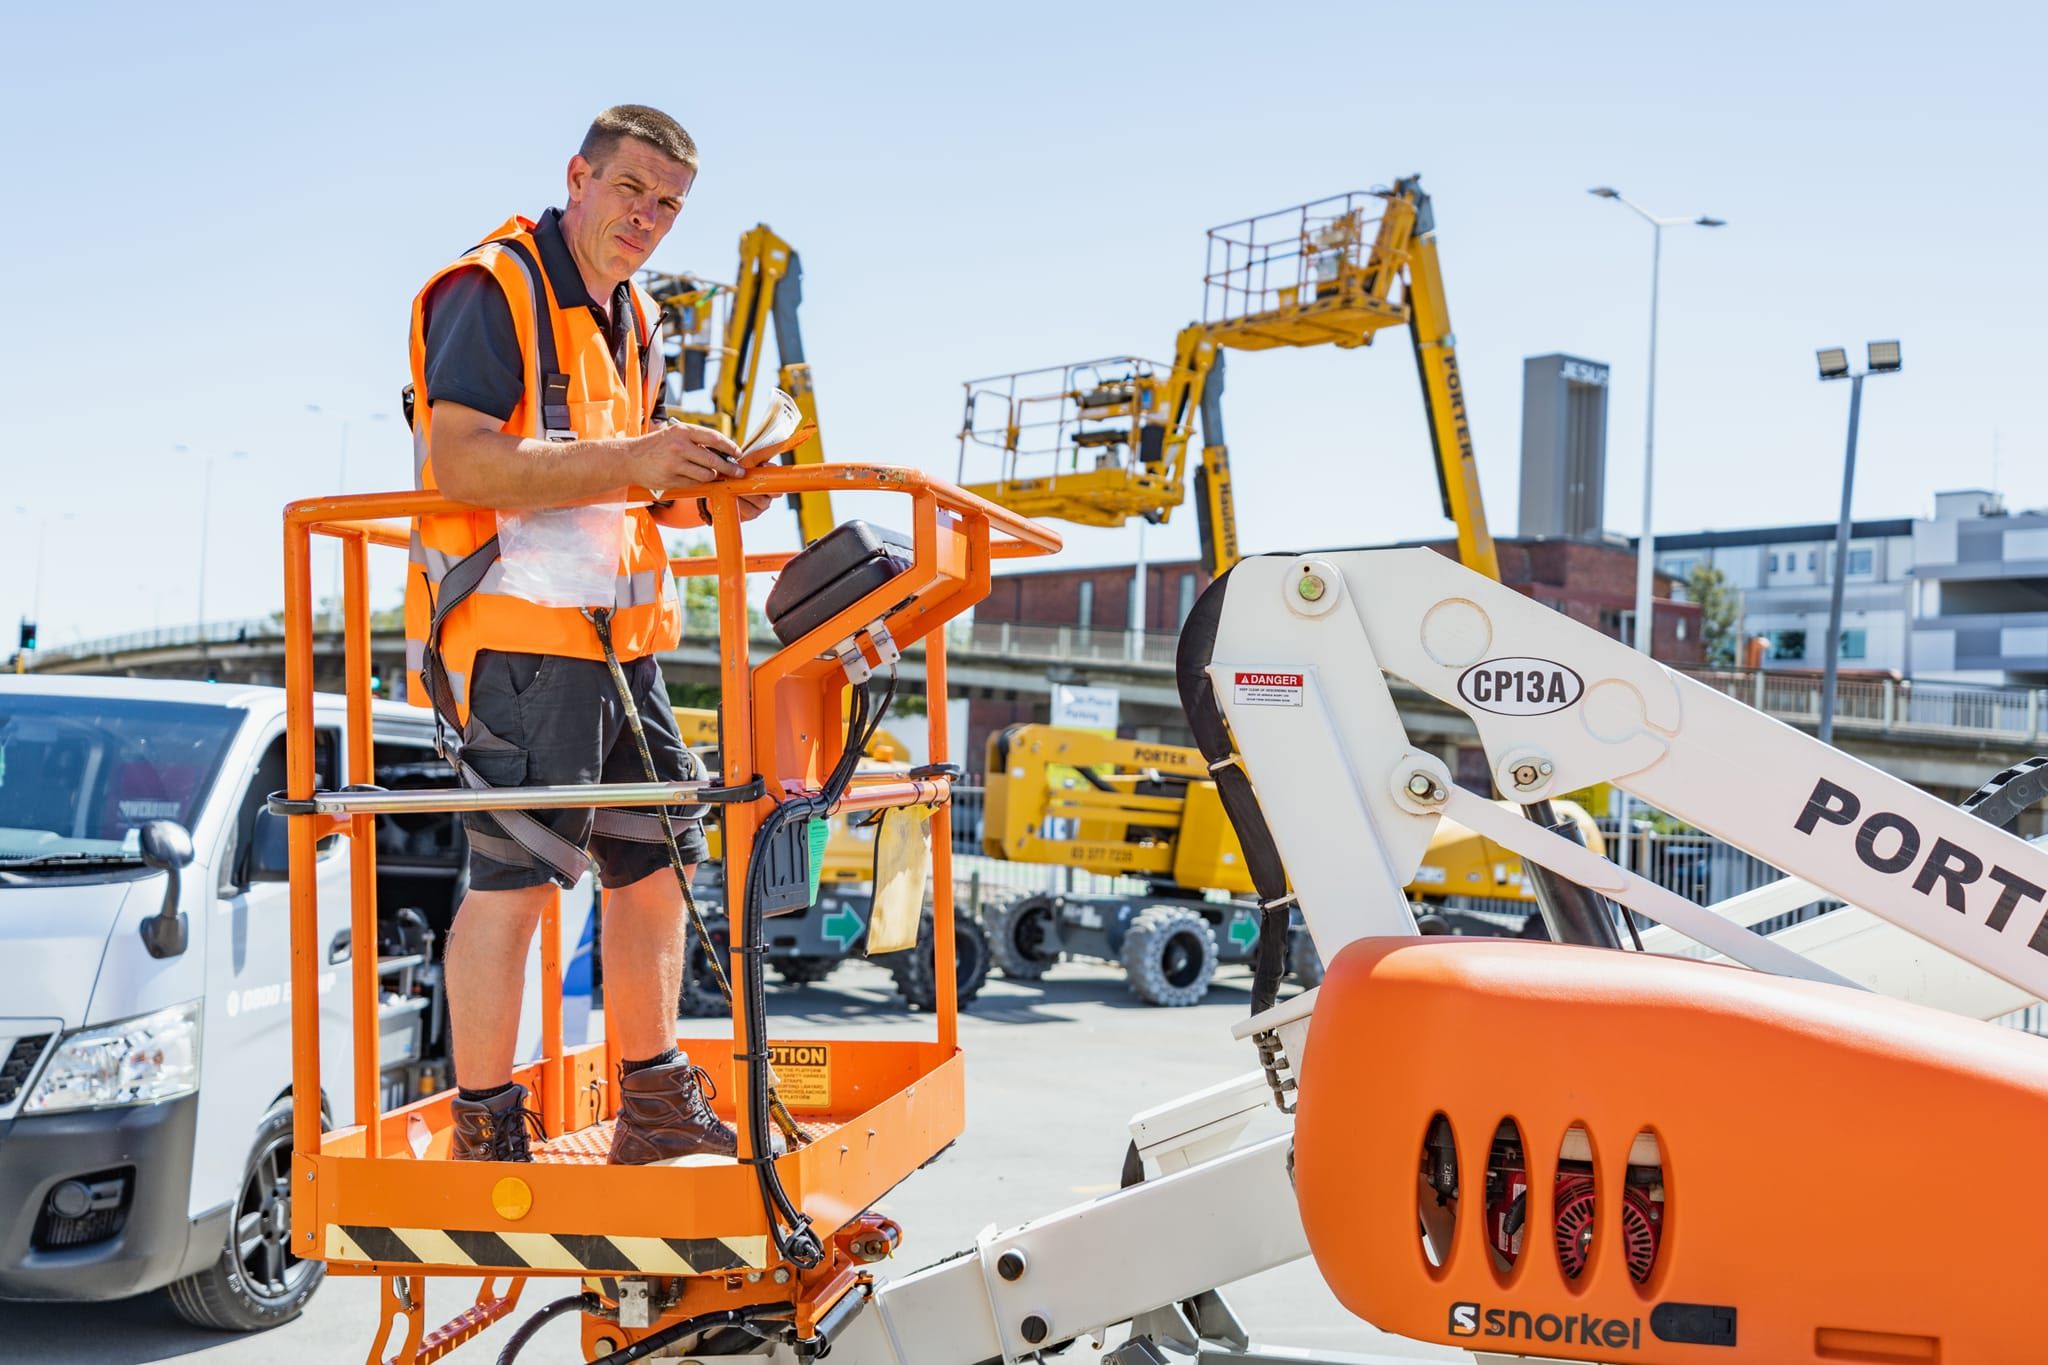 EPS testing their boom lift at Christchurch, New Zealand